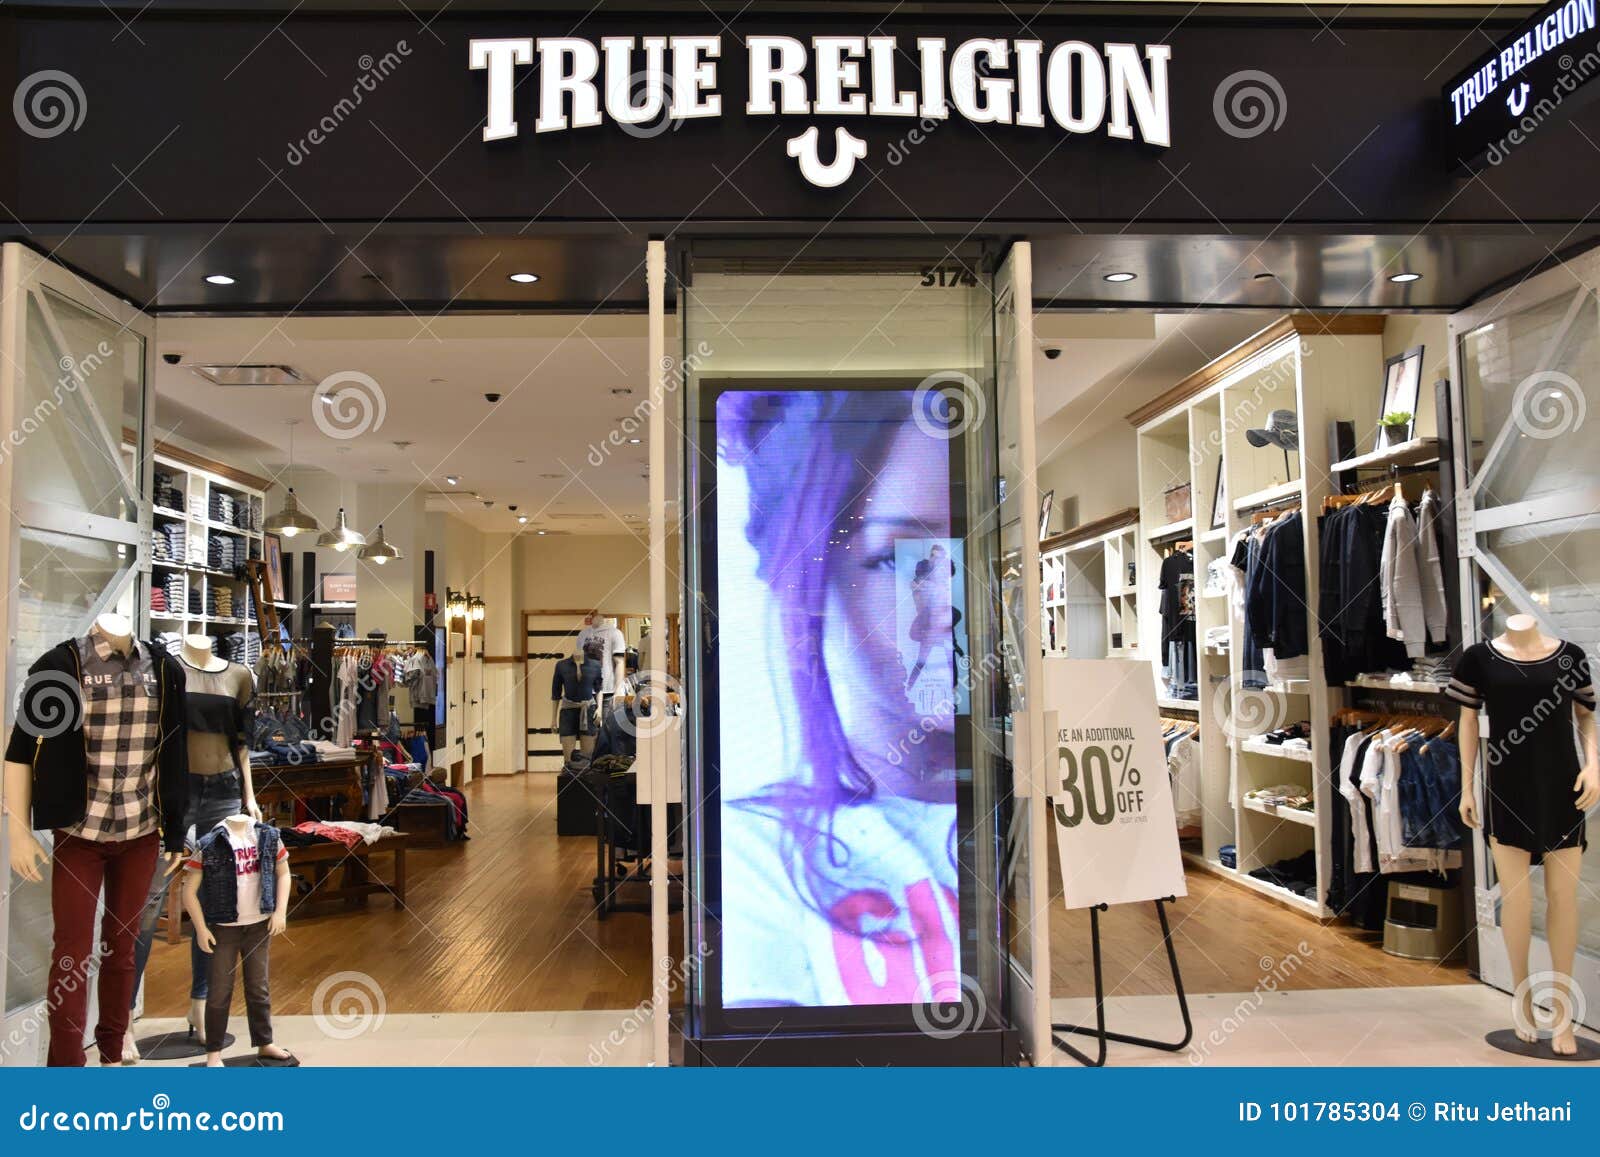 True religion usa when is the new apple macbook pro coming out 2015